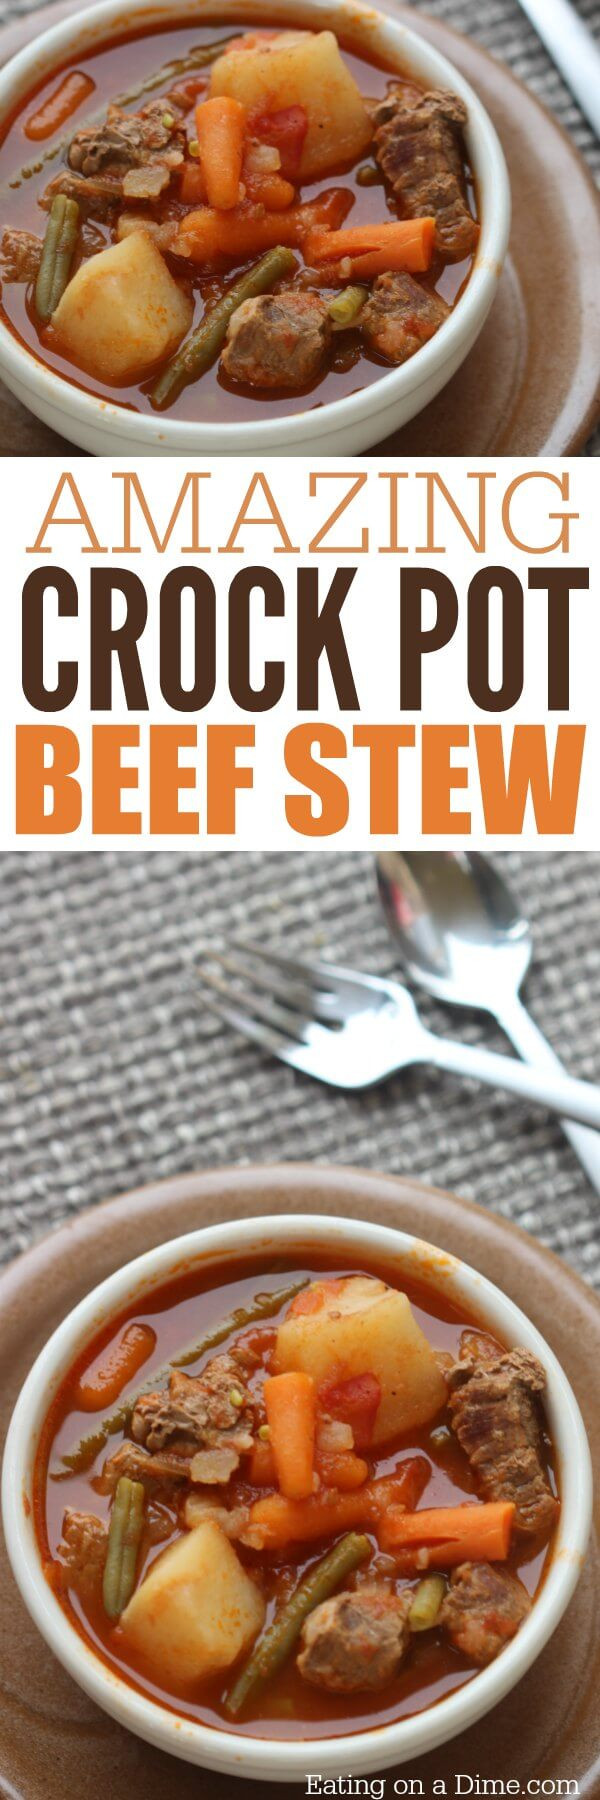 Quick Stew Meat Recipe
 Quick & Easy Crock pot Beef Stew Recipe Eating on a Dime